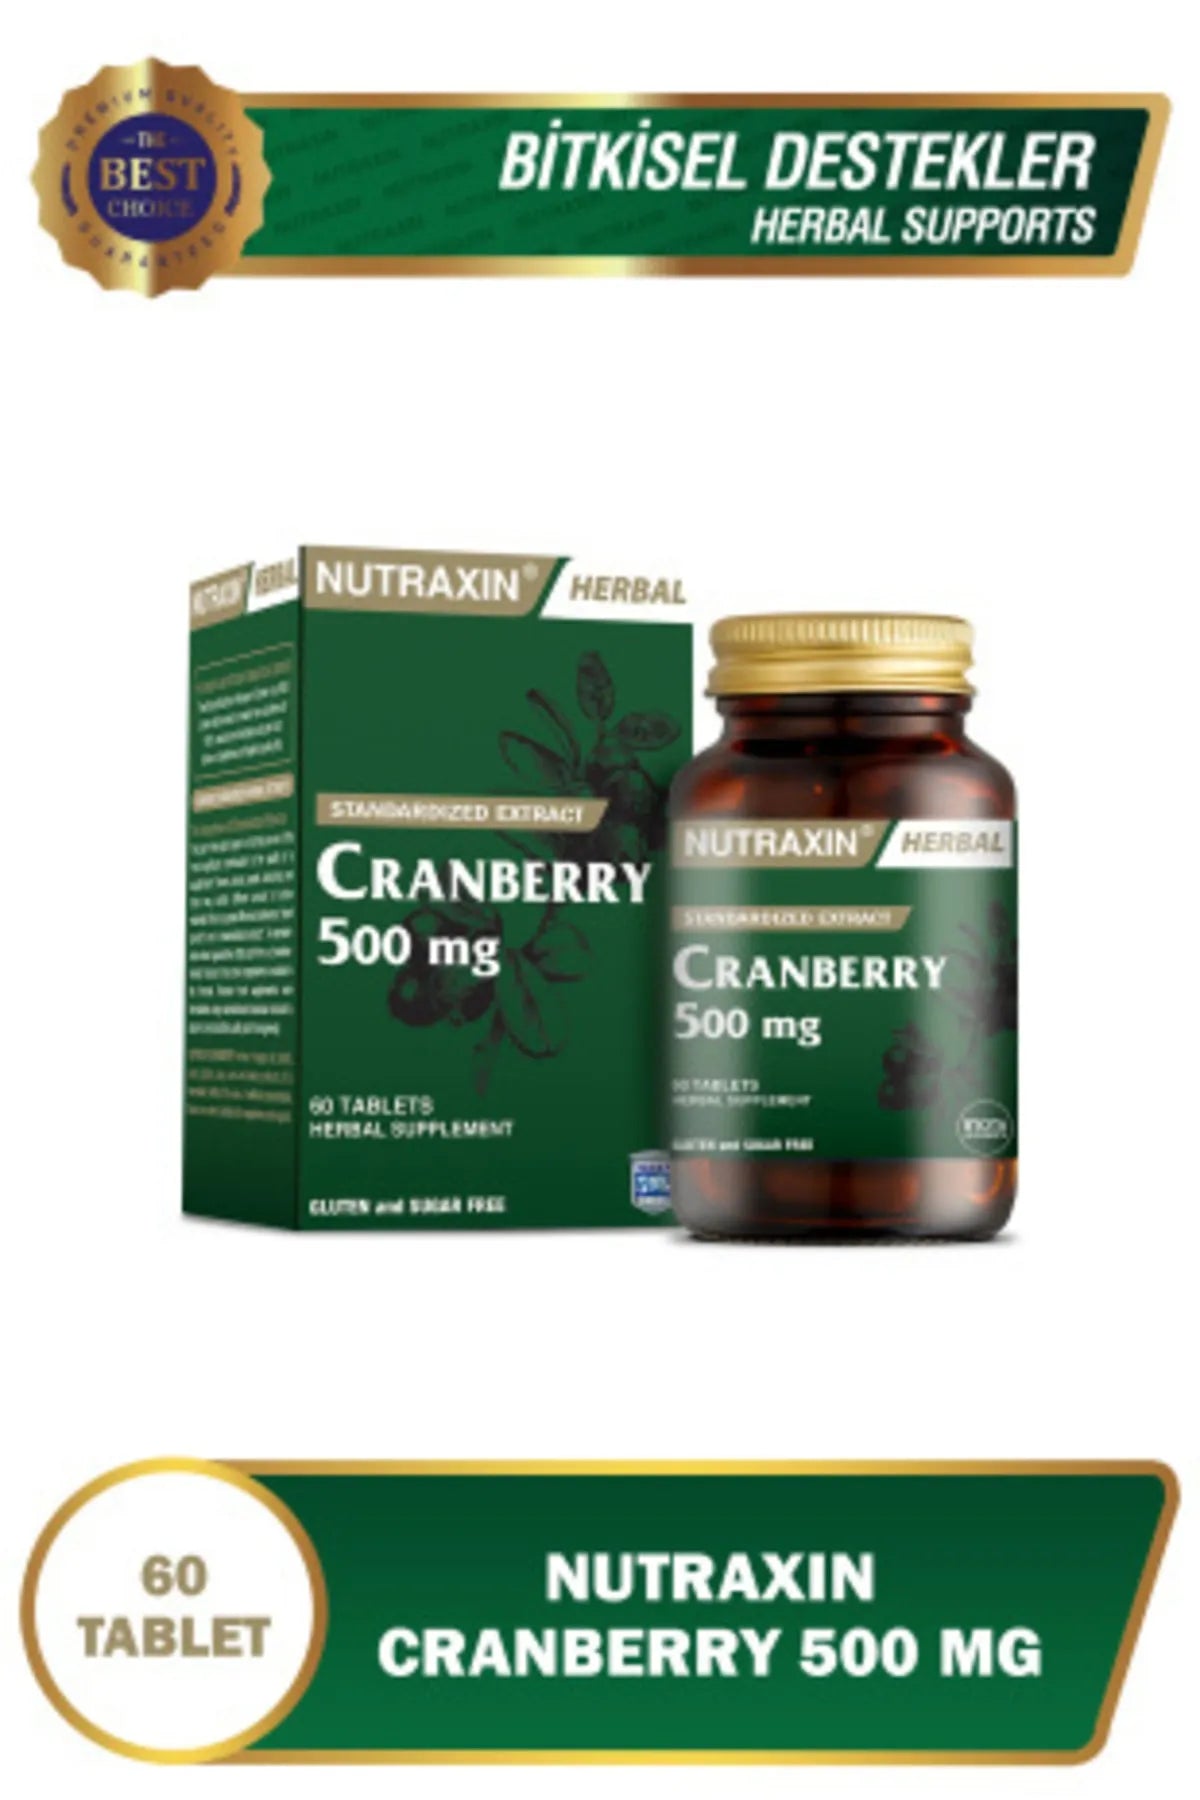 Nutraxin Cranberry 500 mg 60 Tablet